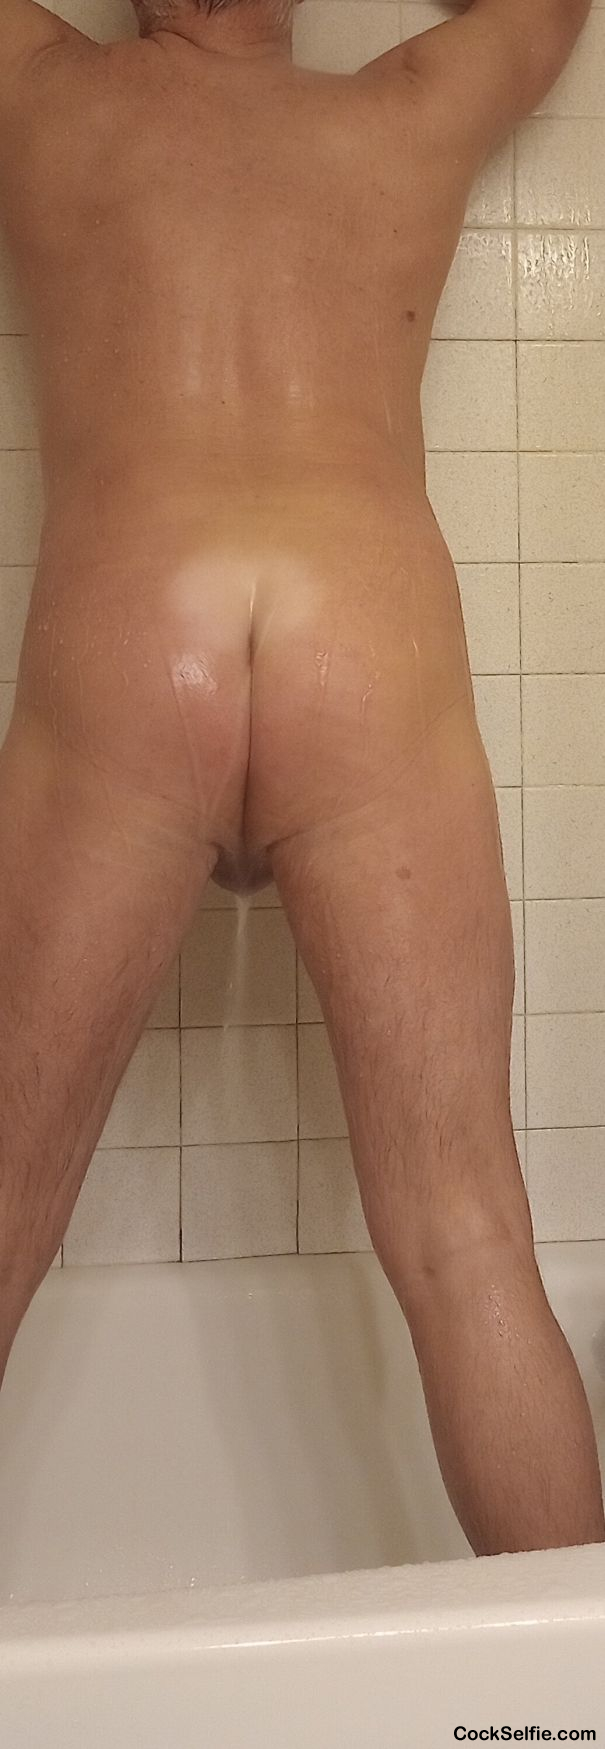 Any takers? What do you think? - Cock Selfie